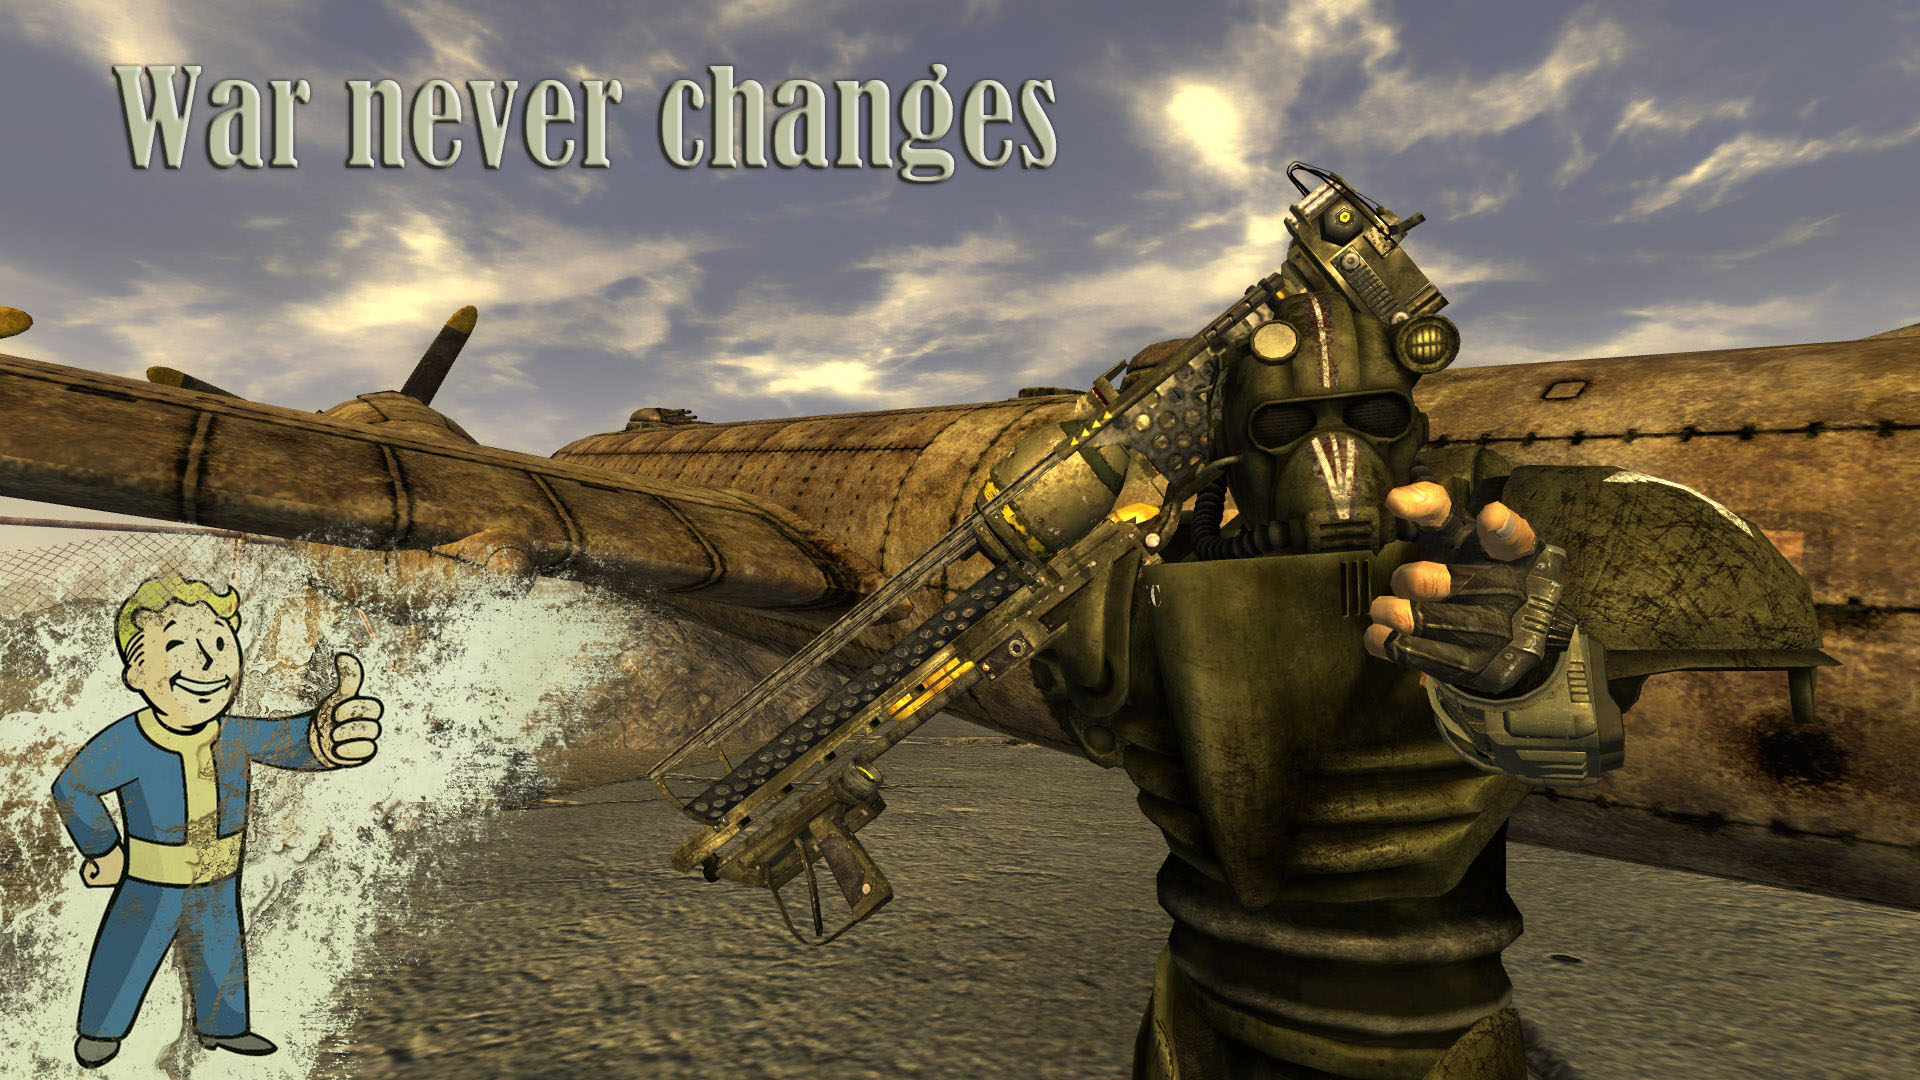 Air Force Power Armor T-57c file - Fallout: New Vegas.